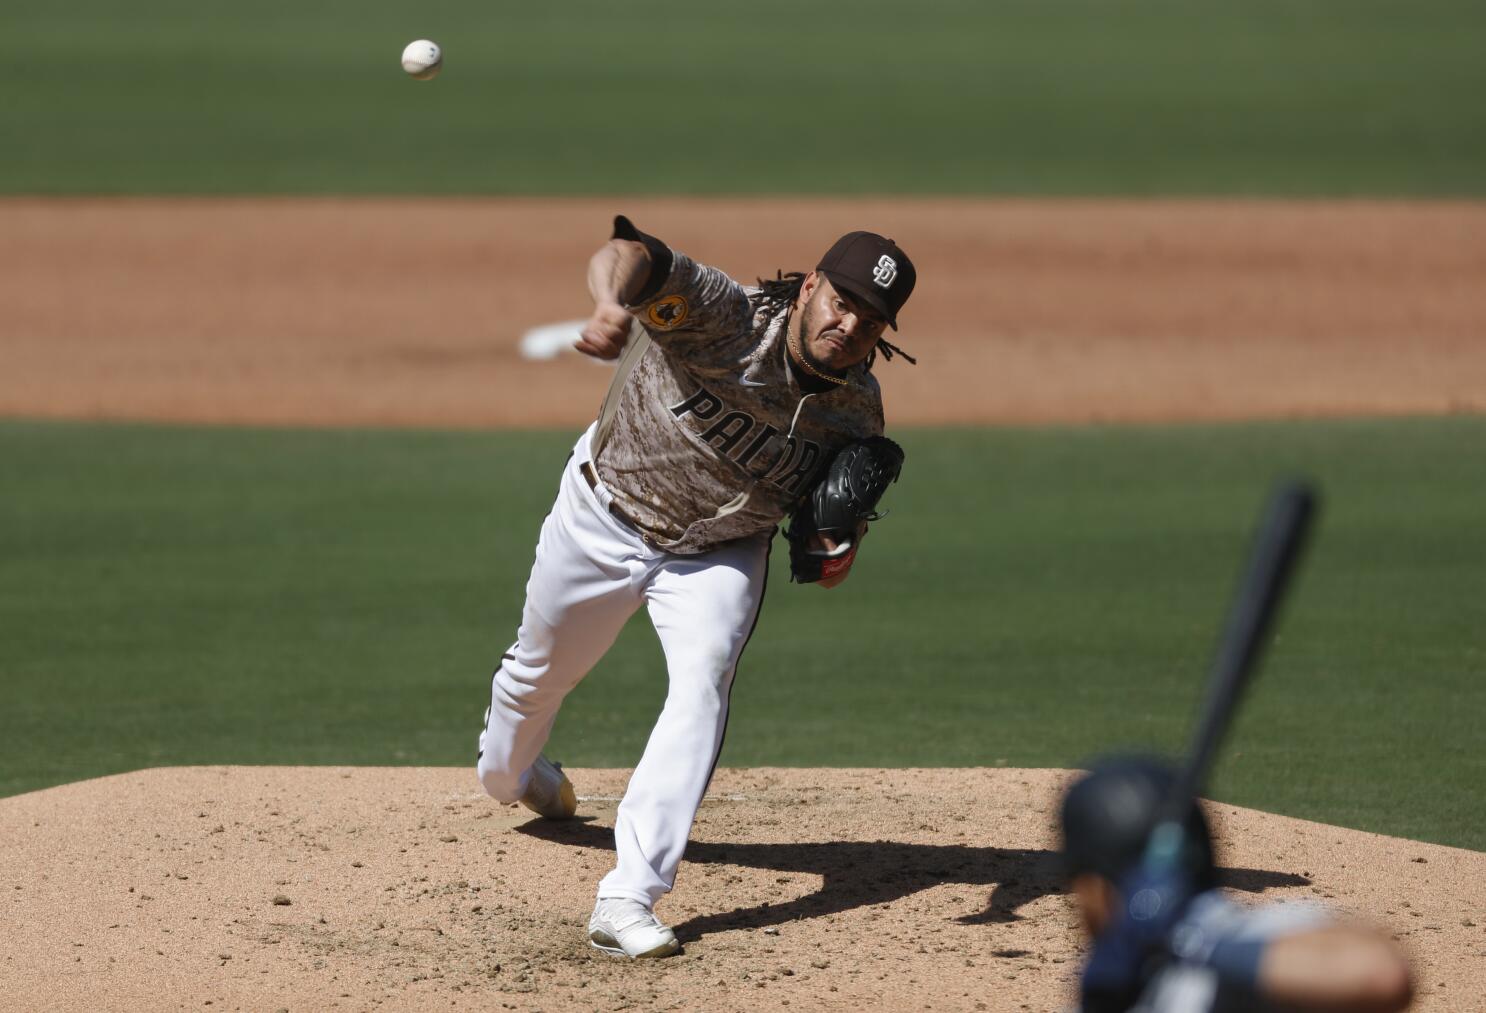 Padres' Paddack and Peavy very similar